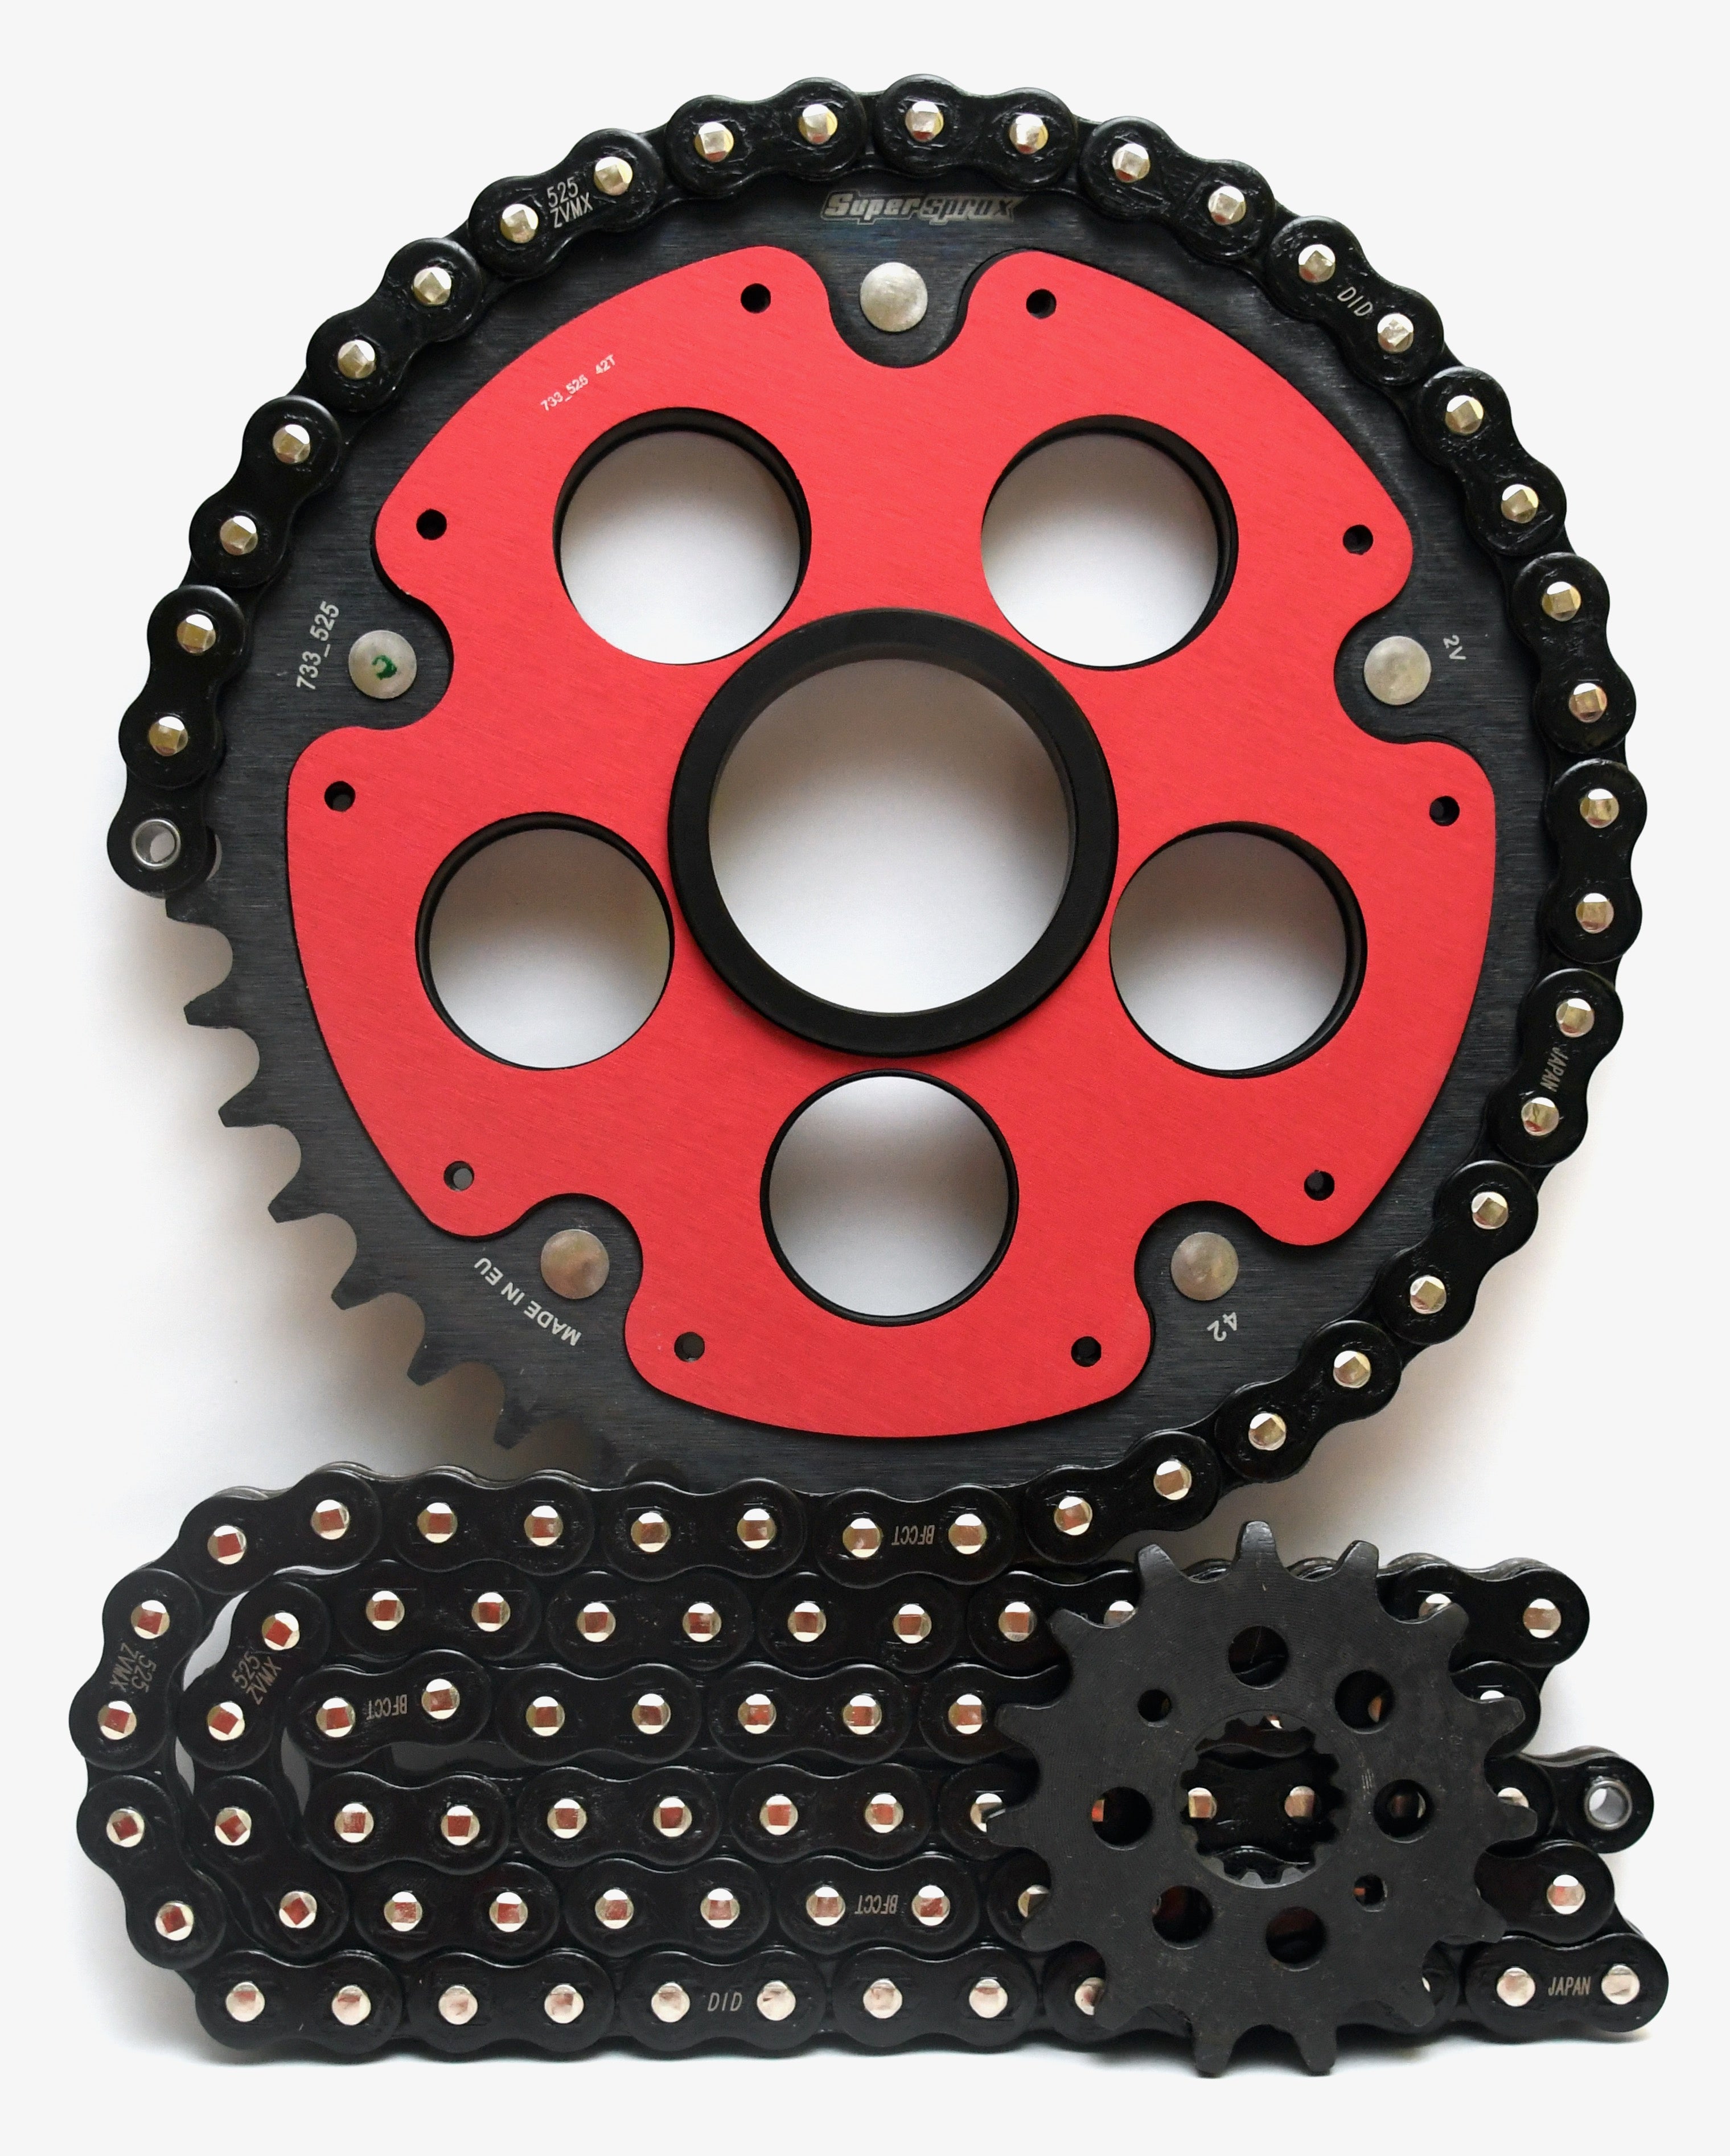 Supersprox Chain & Sprocket Kit for Ducati 1000 Monster S2R 2006-2008 - Standard Gearing